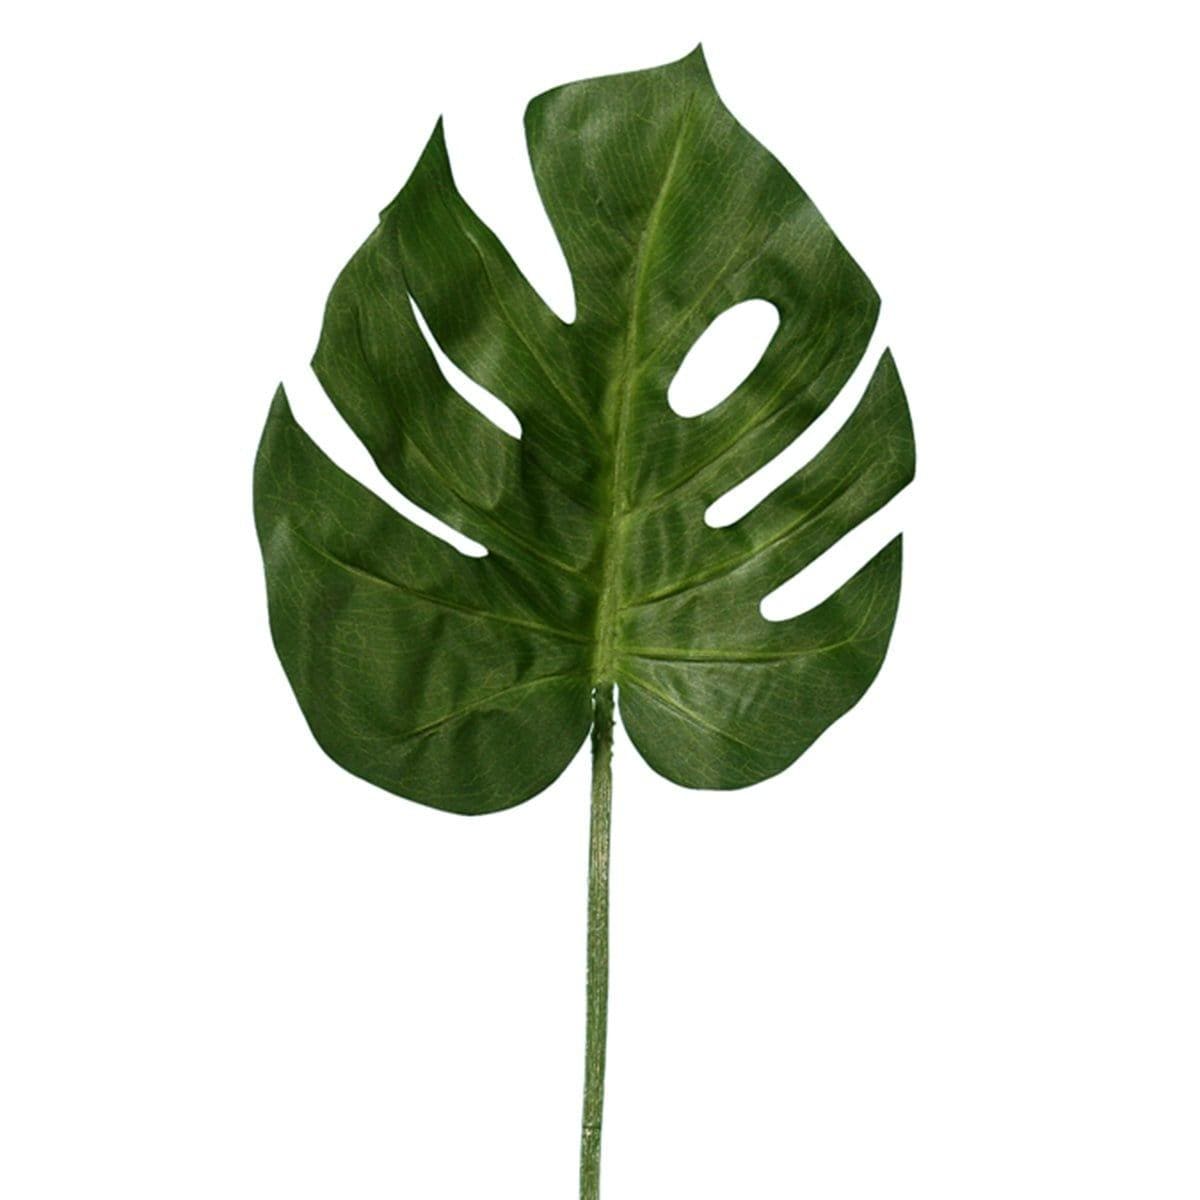 Buy Theme Party Green Large Leaf sold at Party Expert